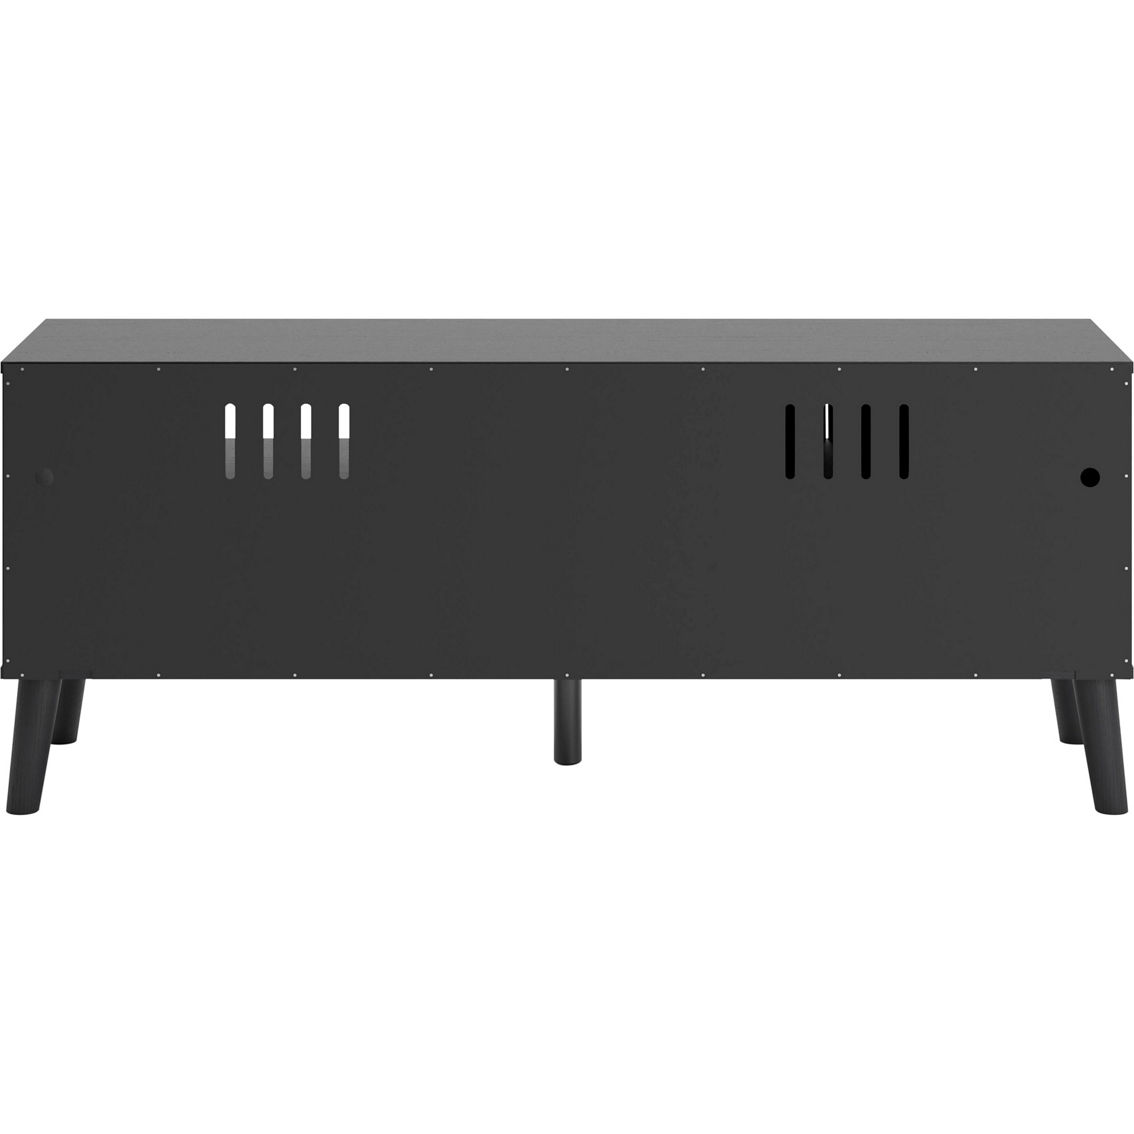 Signature Design by Ashley Charlang Ready-To-Assemble 59 in. TV Stand - Image 2 of 6